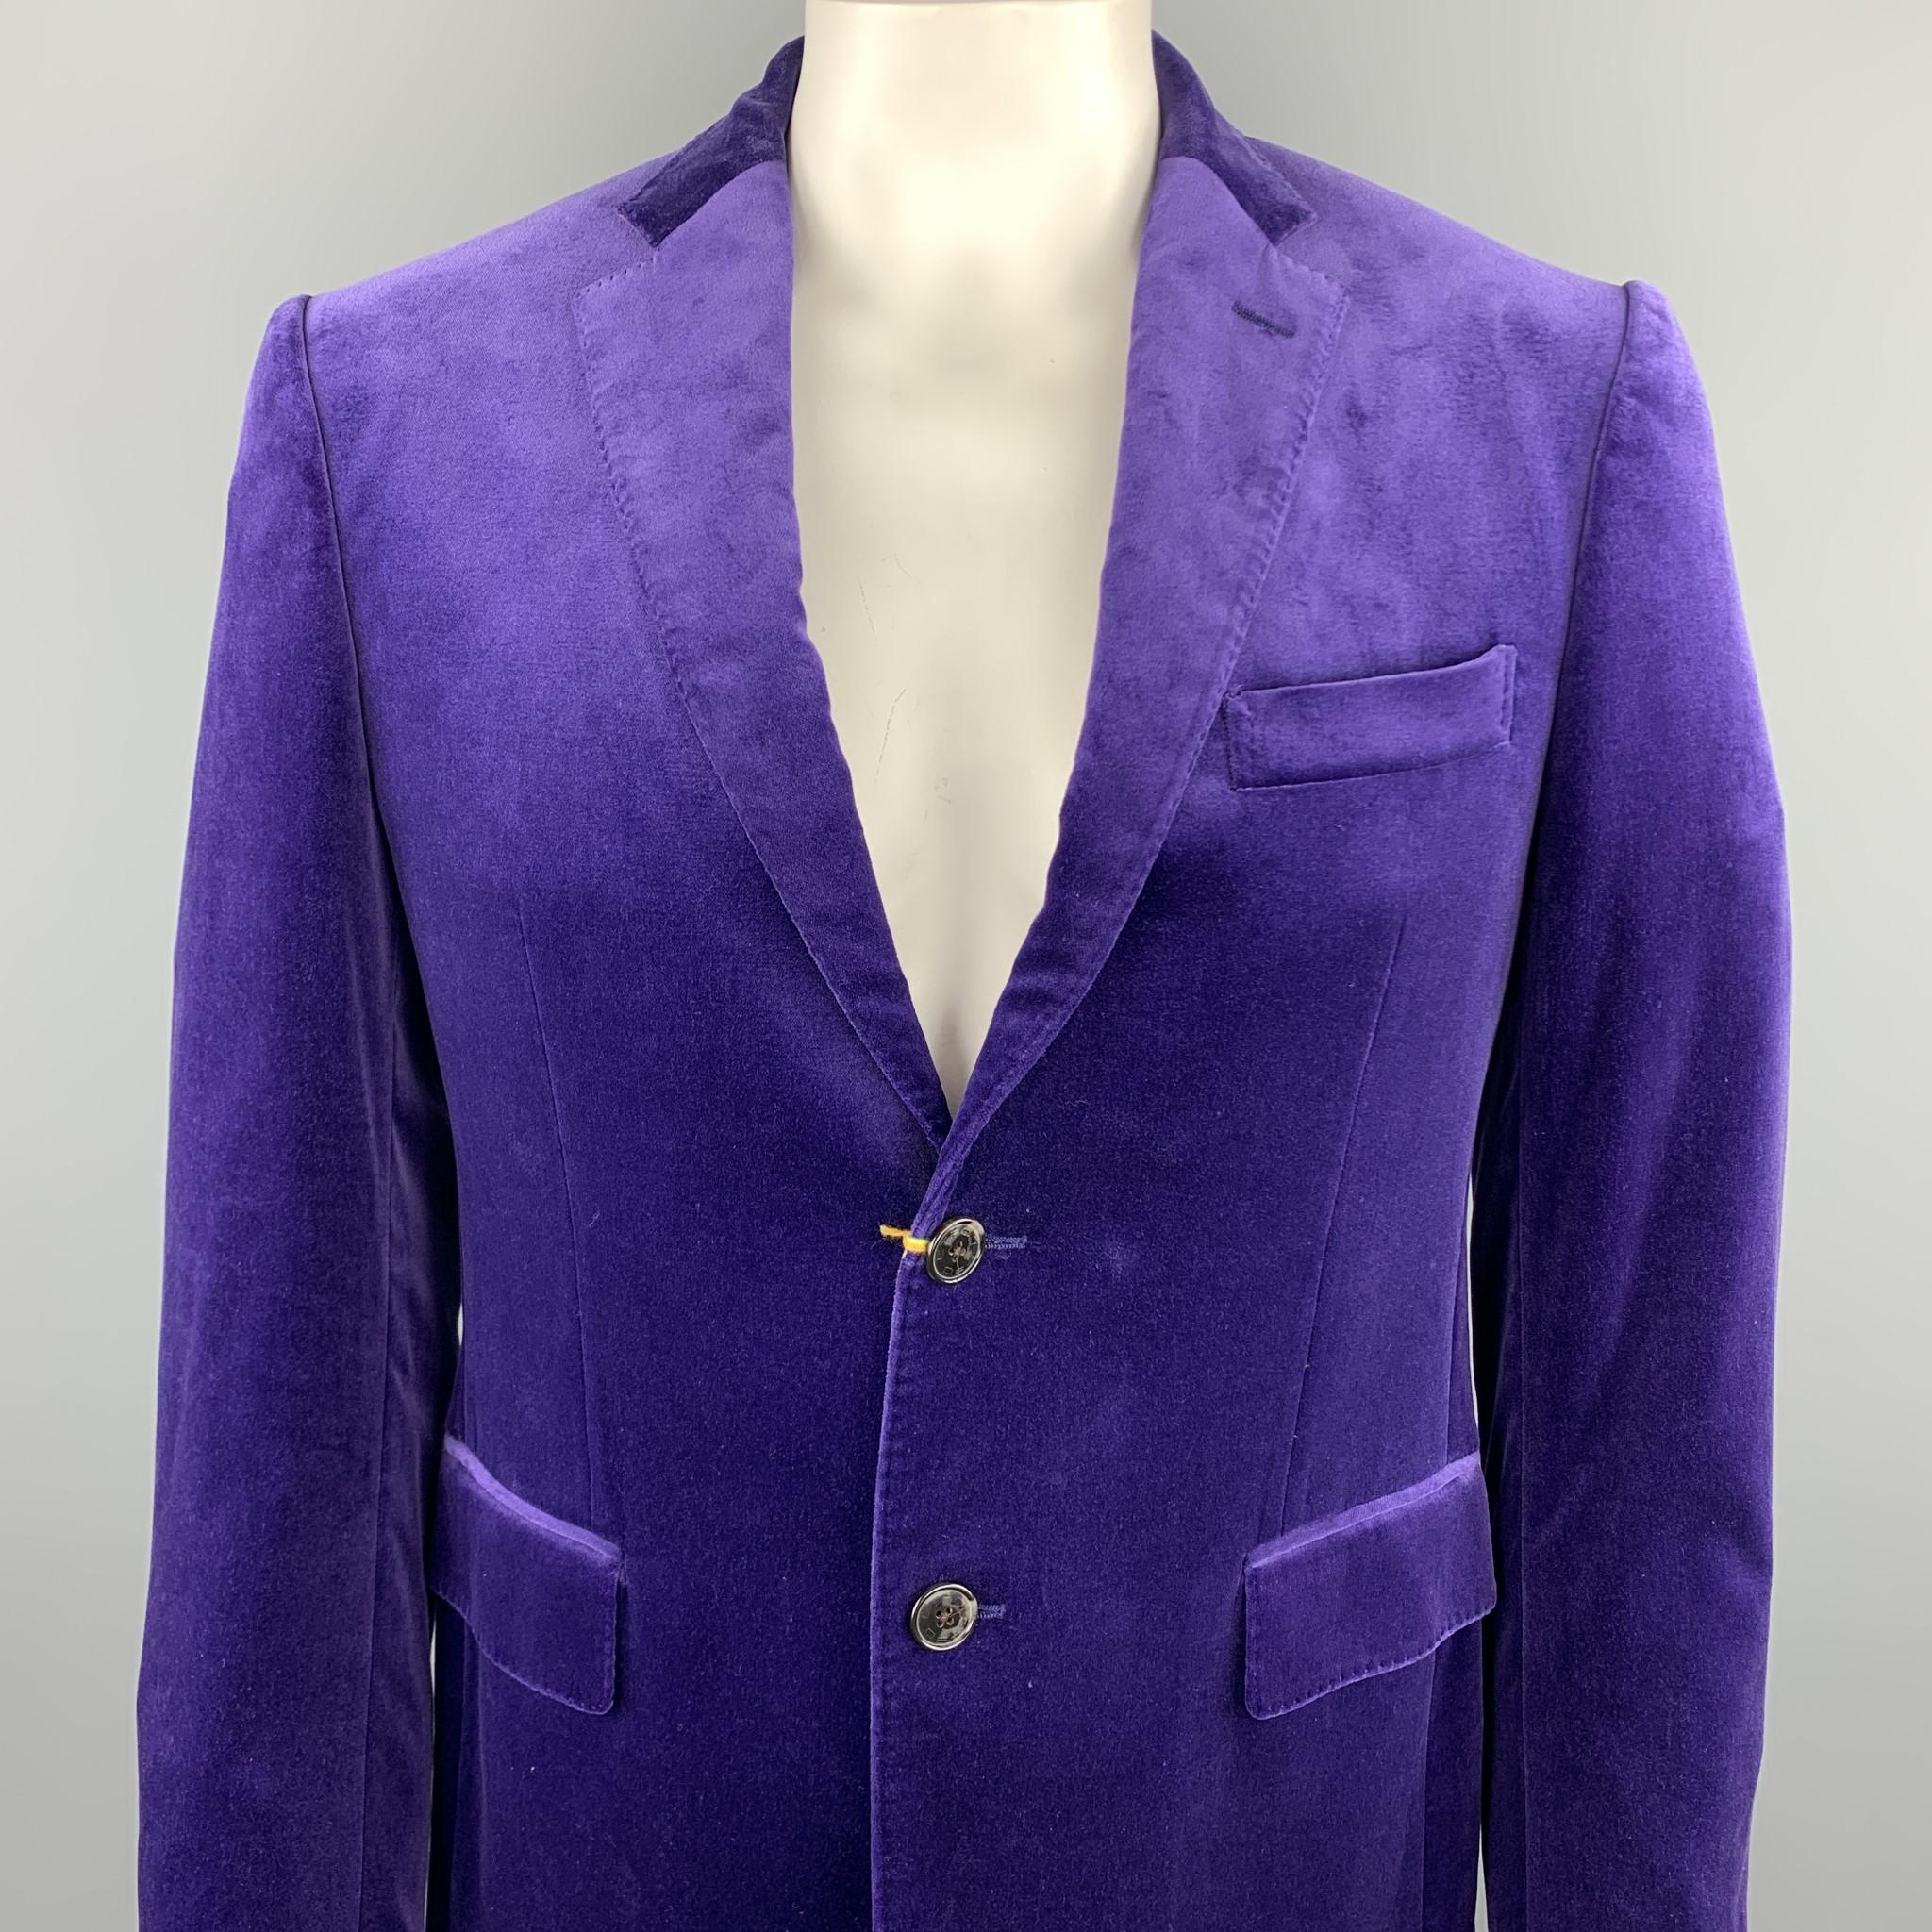 Retailed for: $1,495.00. ETRO sport coat comes in a purple velvet featuring a notch lapel style, flap pockets, and a two button closure. Made in Italy.

New With Tags.
Marked: IT 50

Measurements:

Shoulder: 19 in. 
Chest: 40 in. 
Sleeve: 26 in.